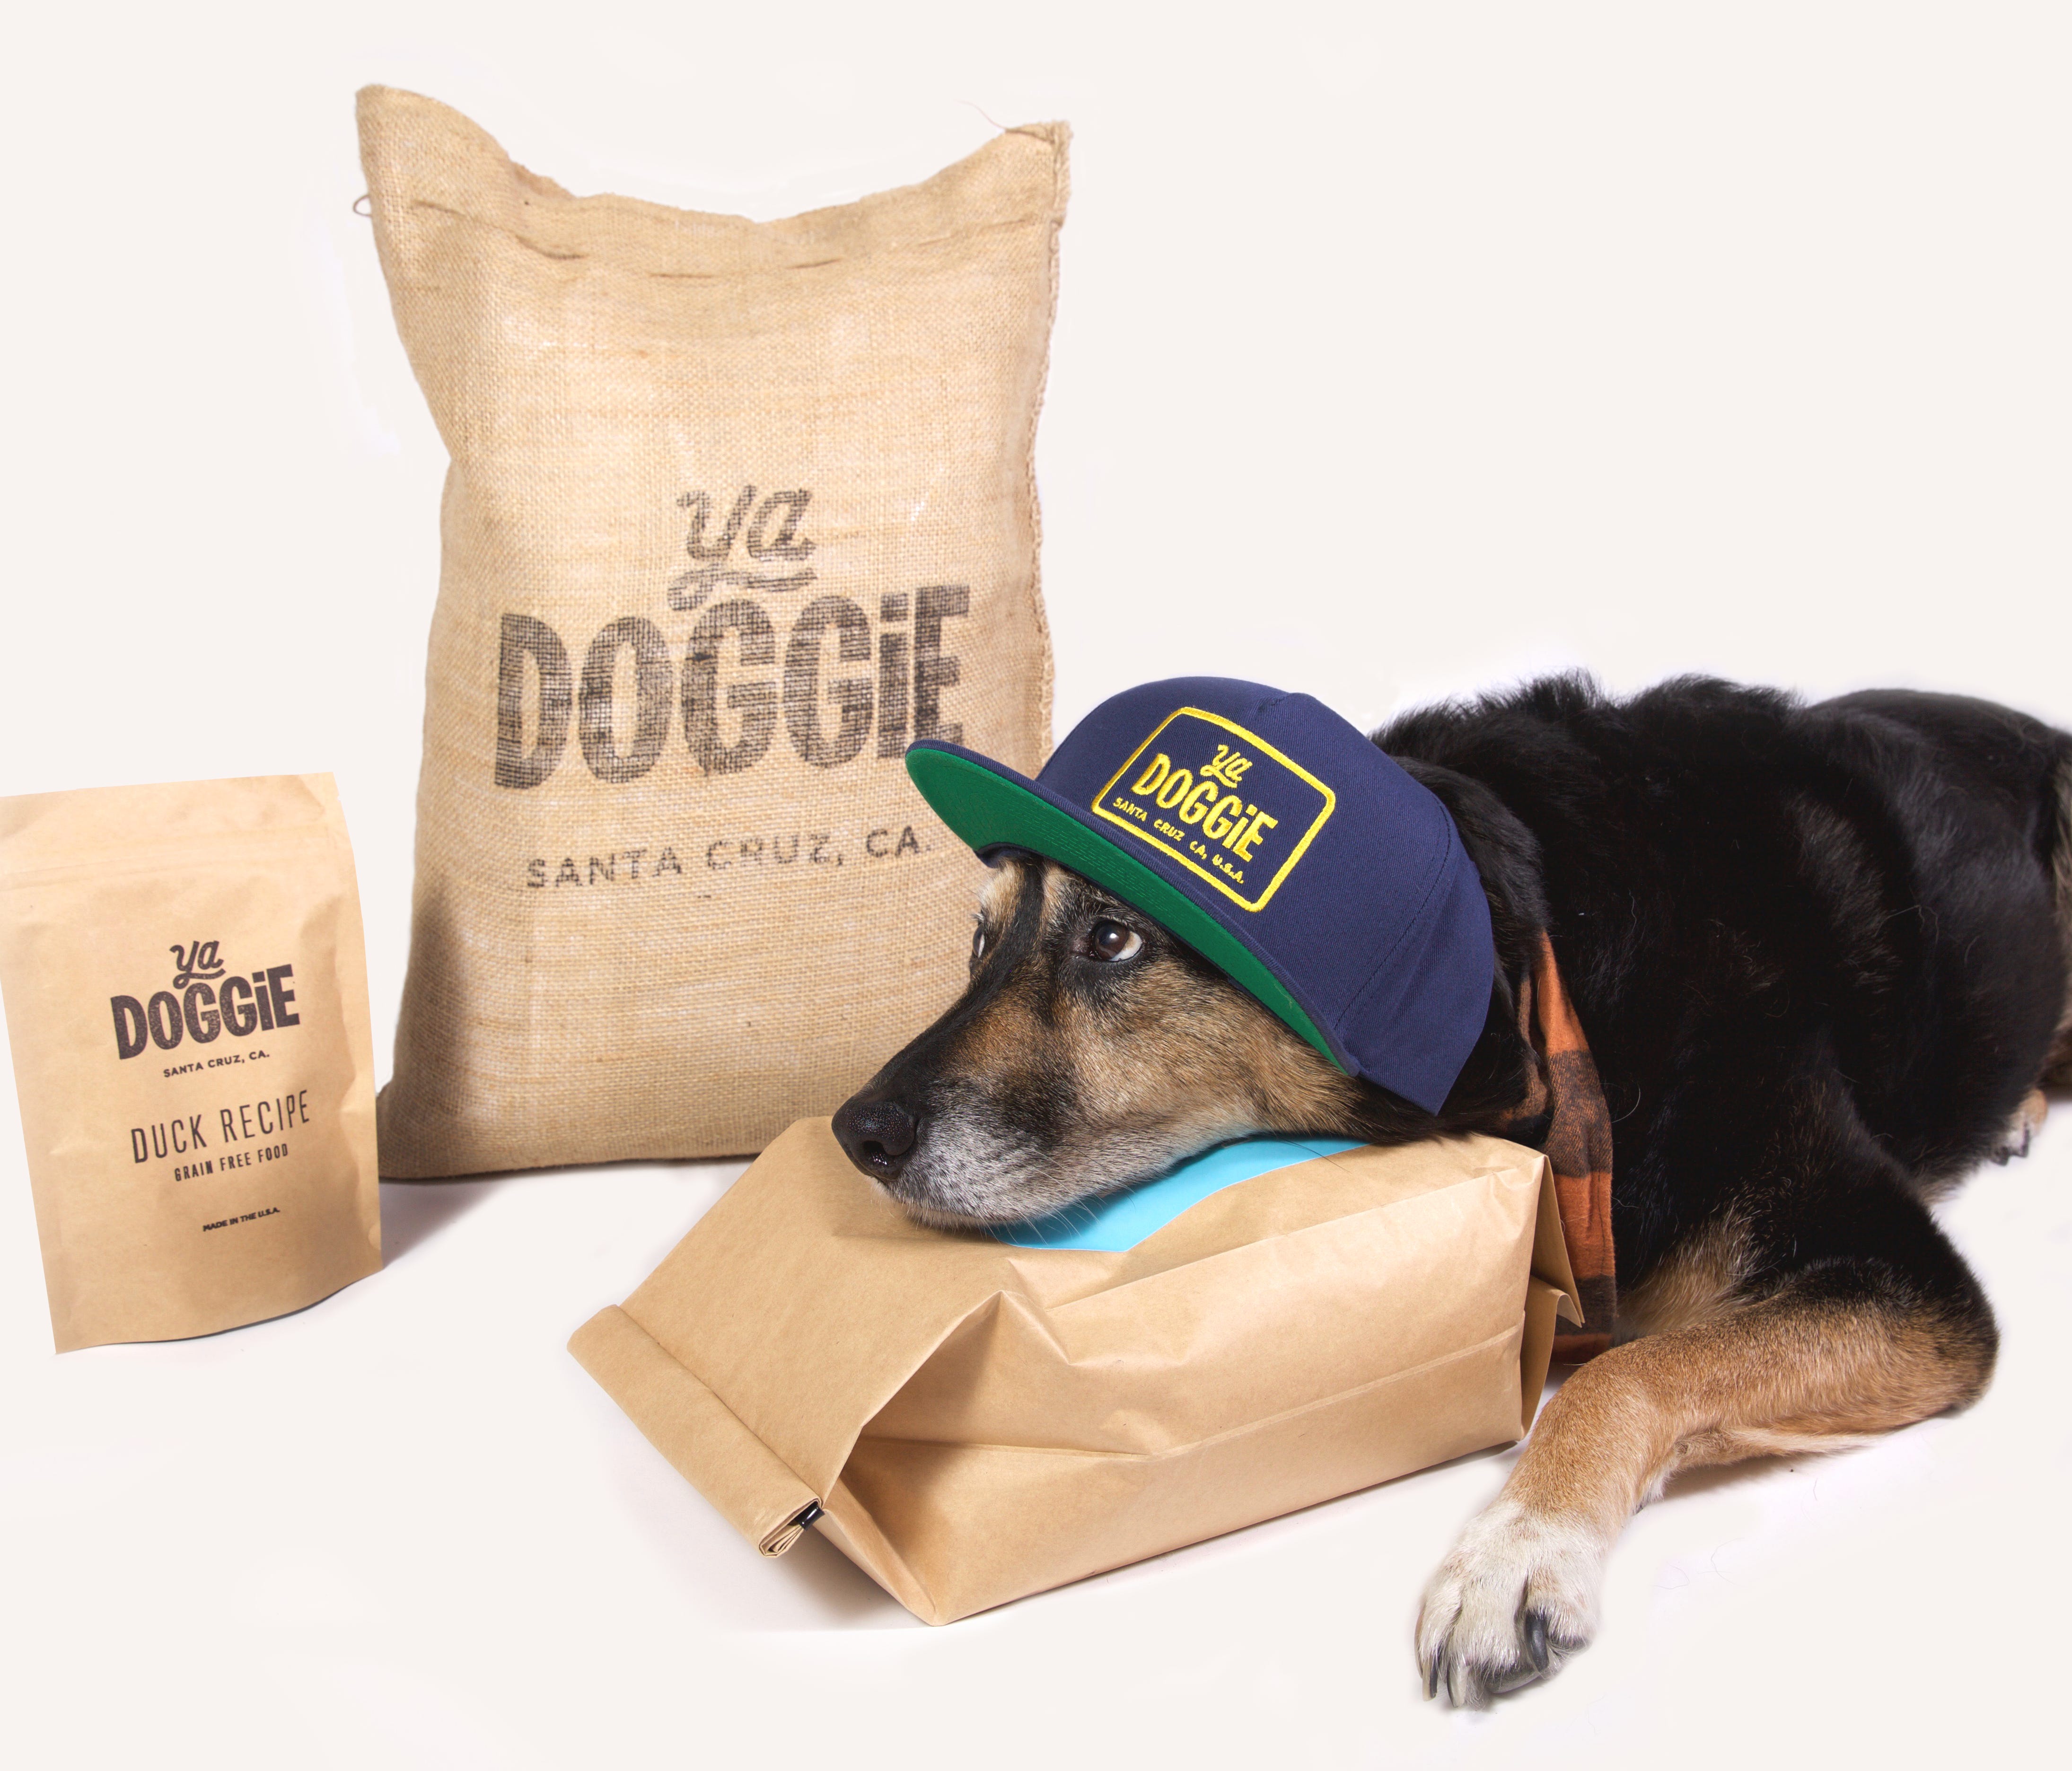 YaDoggie is a monthly subscription service for dogs